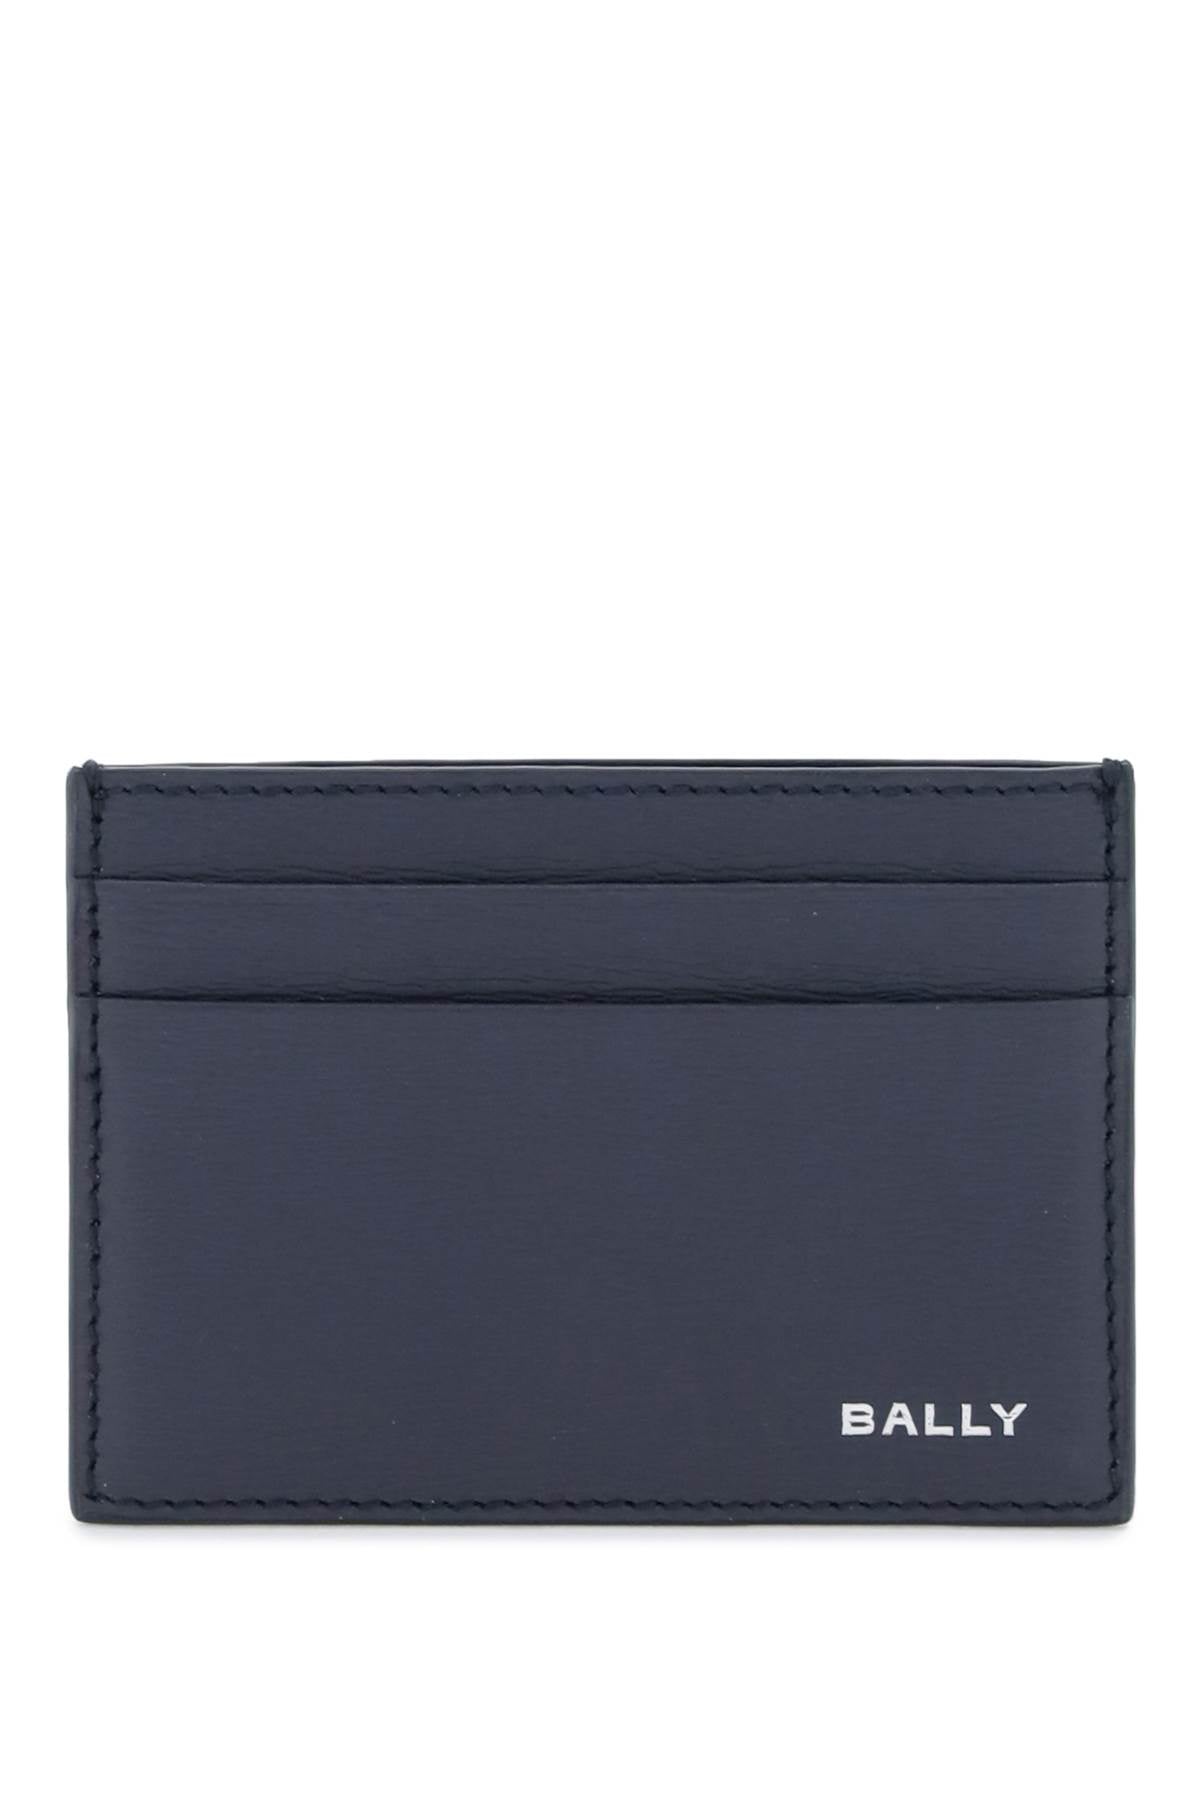 Bally leather crossing cardholder-0